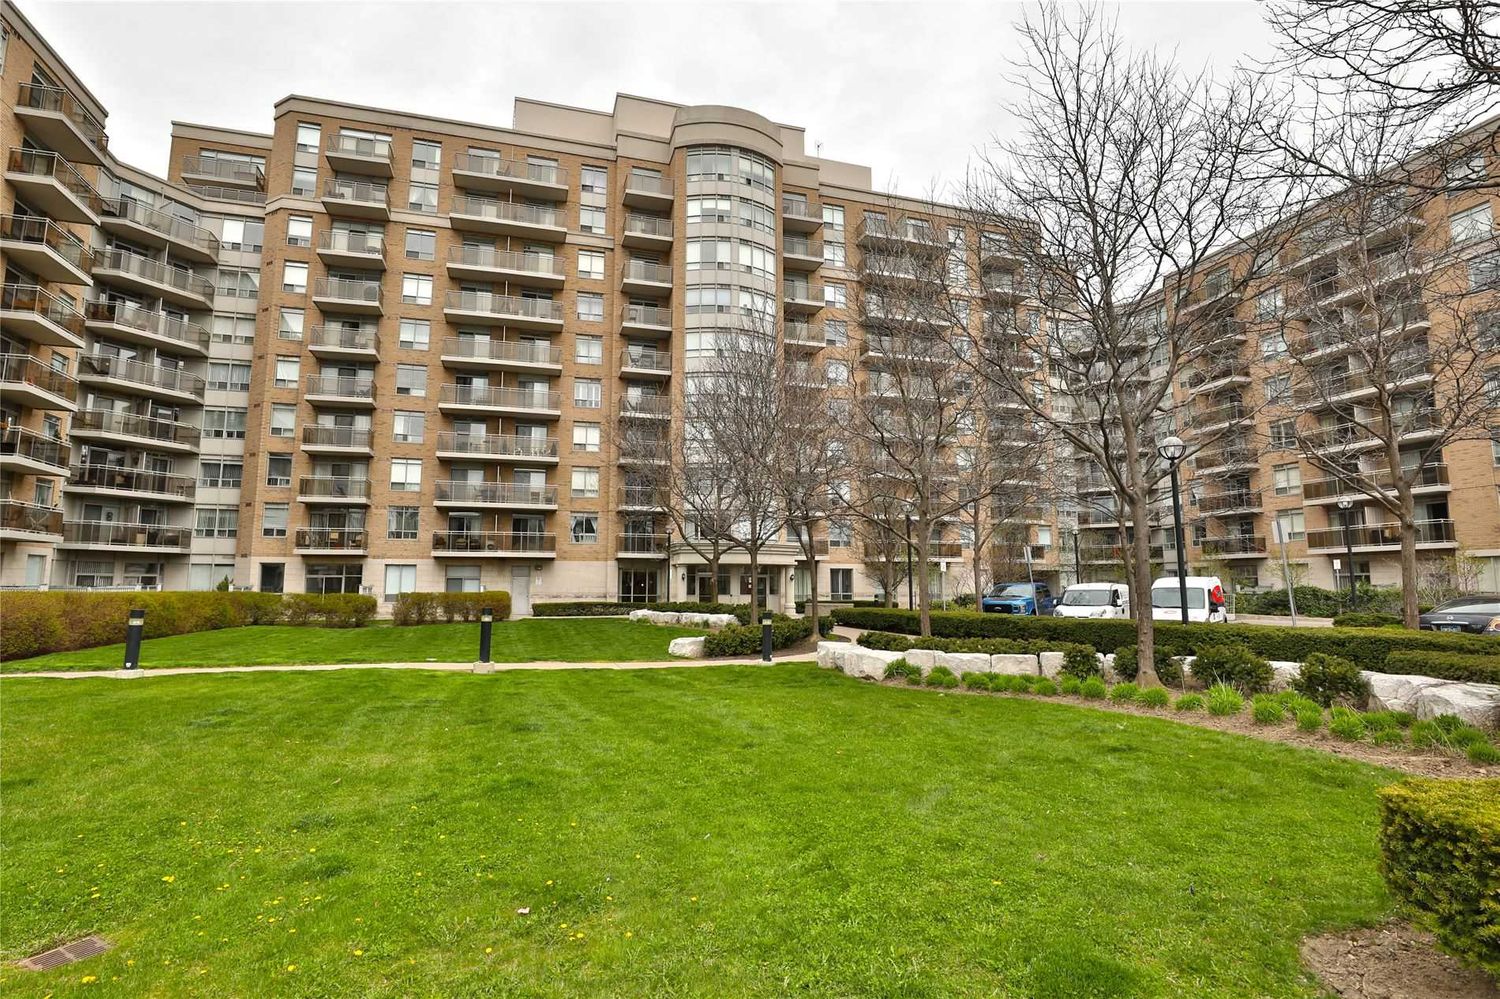 650 Lawrence Avenue W. The Shermount Condos is located in  North York, Toronto - image #1 of 2